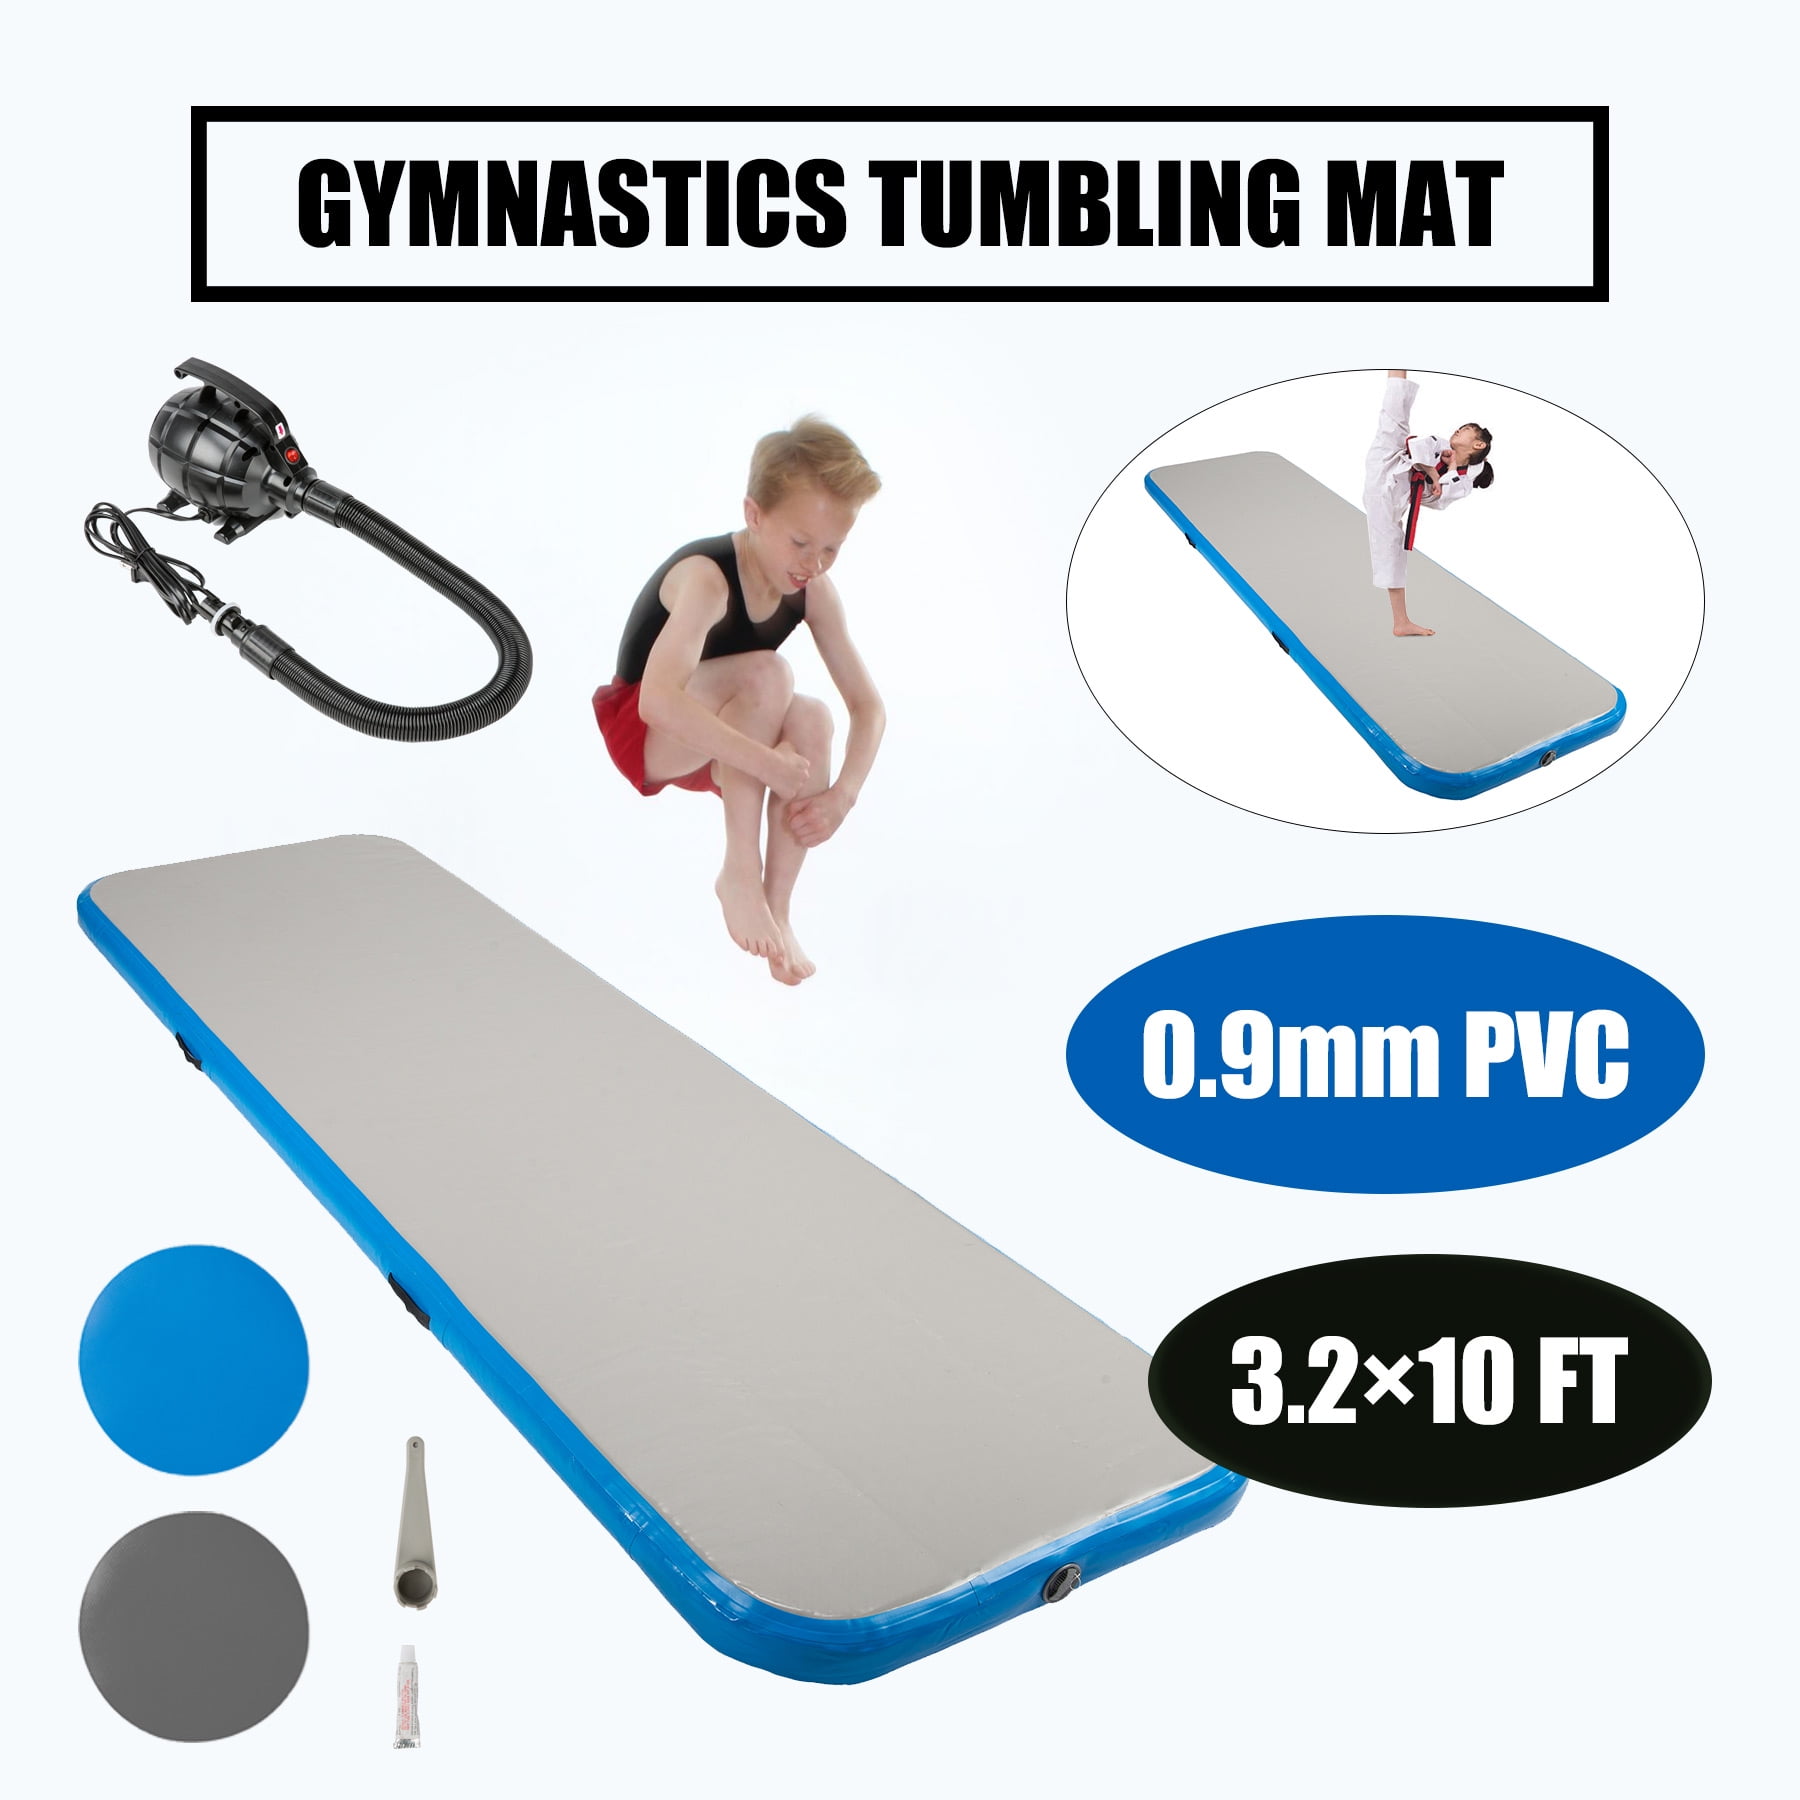 3mx1mx0.1m 10ft Tumbling Air Track Inflatable Gymnastics Tumble Track AirTrack Air Floor Mats for Home，Gym Backyard Cheerleading Beach Training Park and Pool 